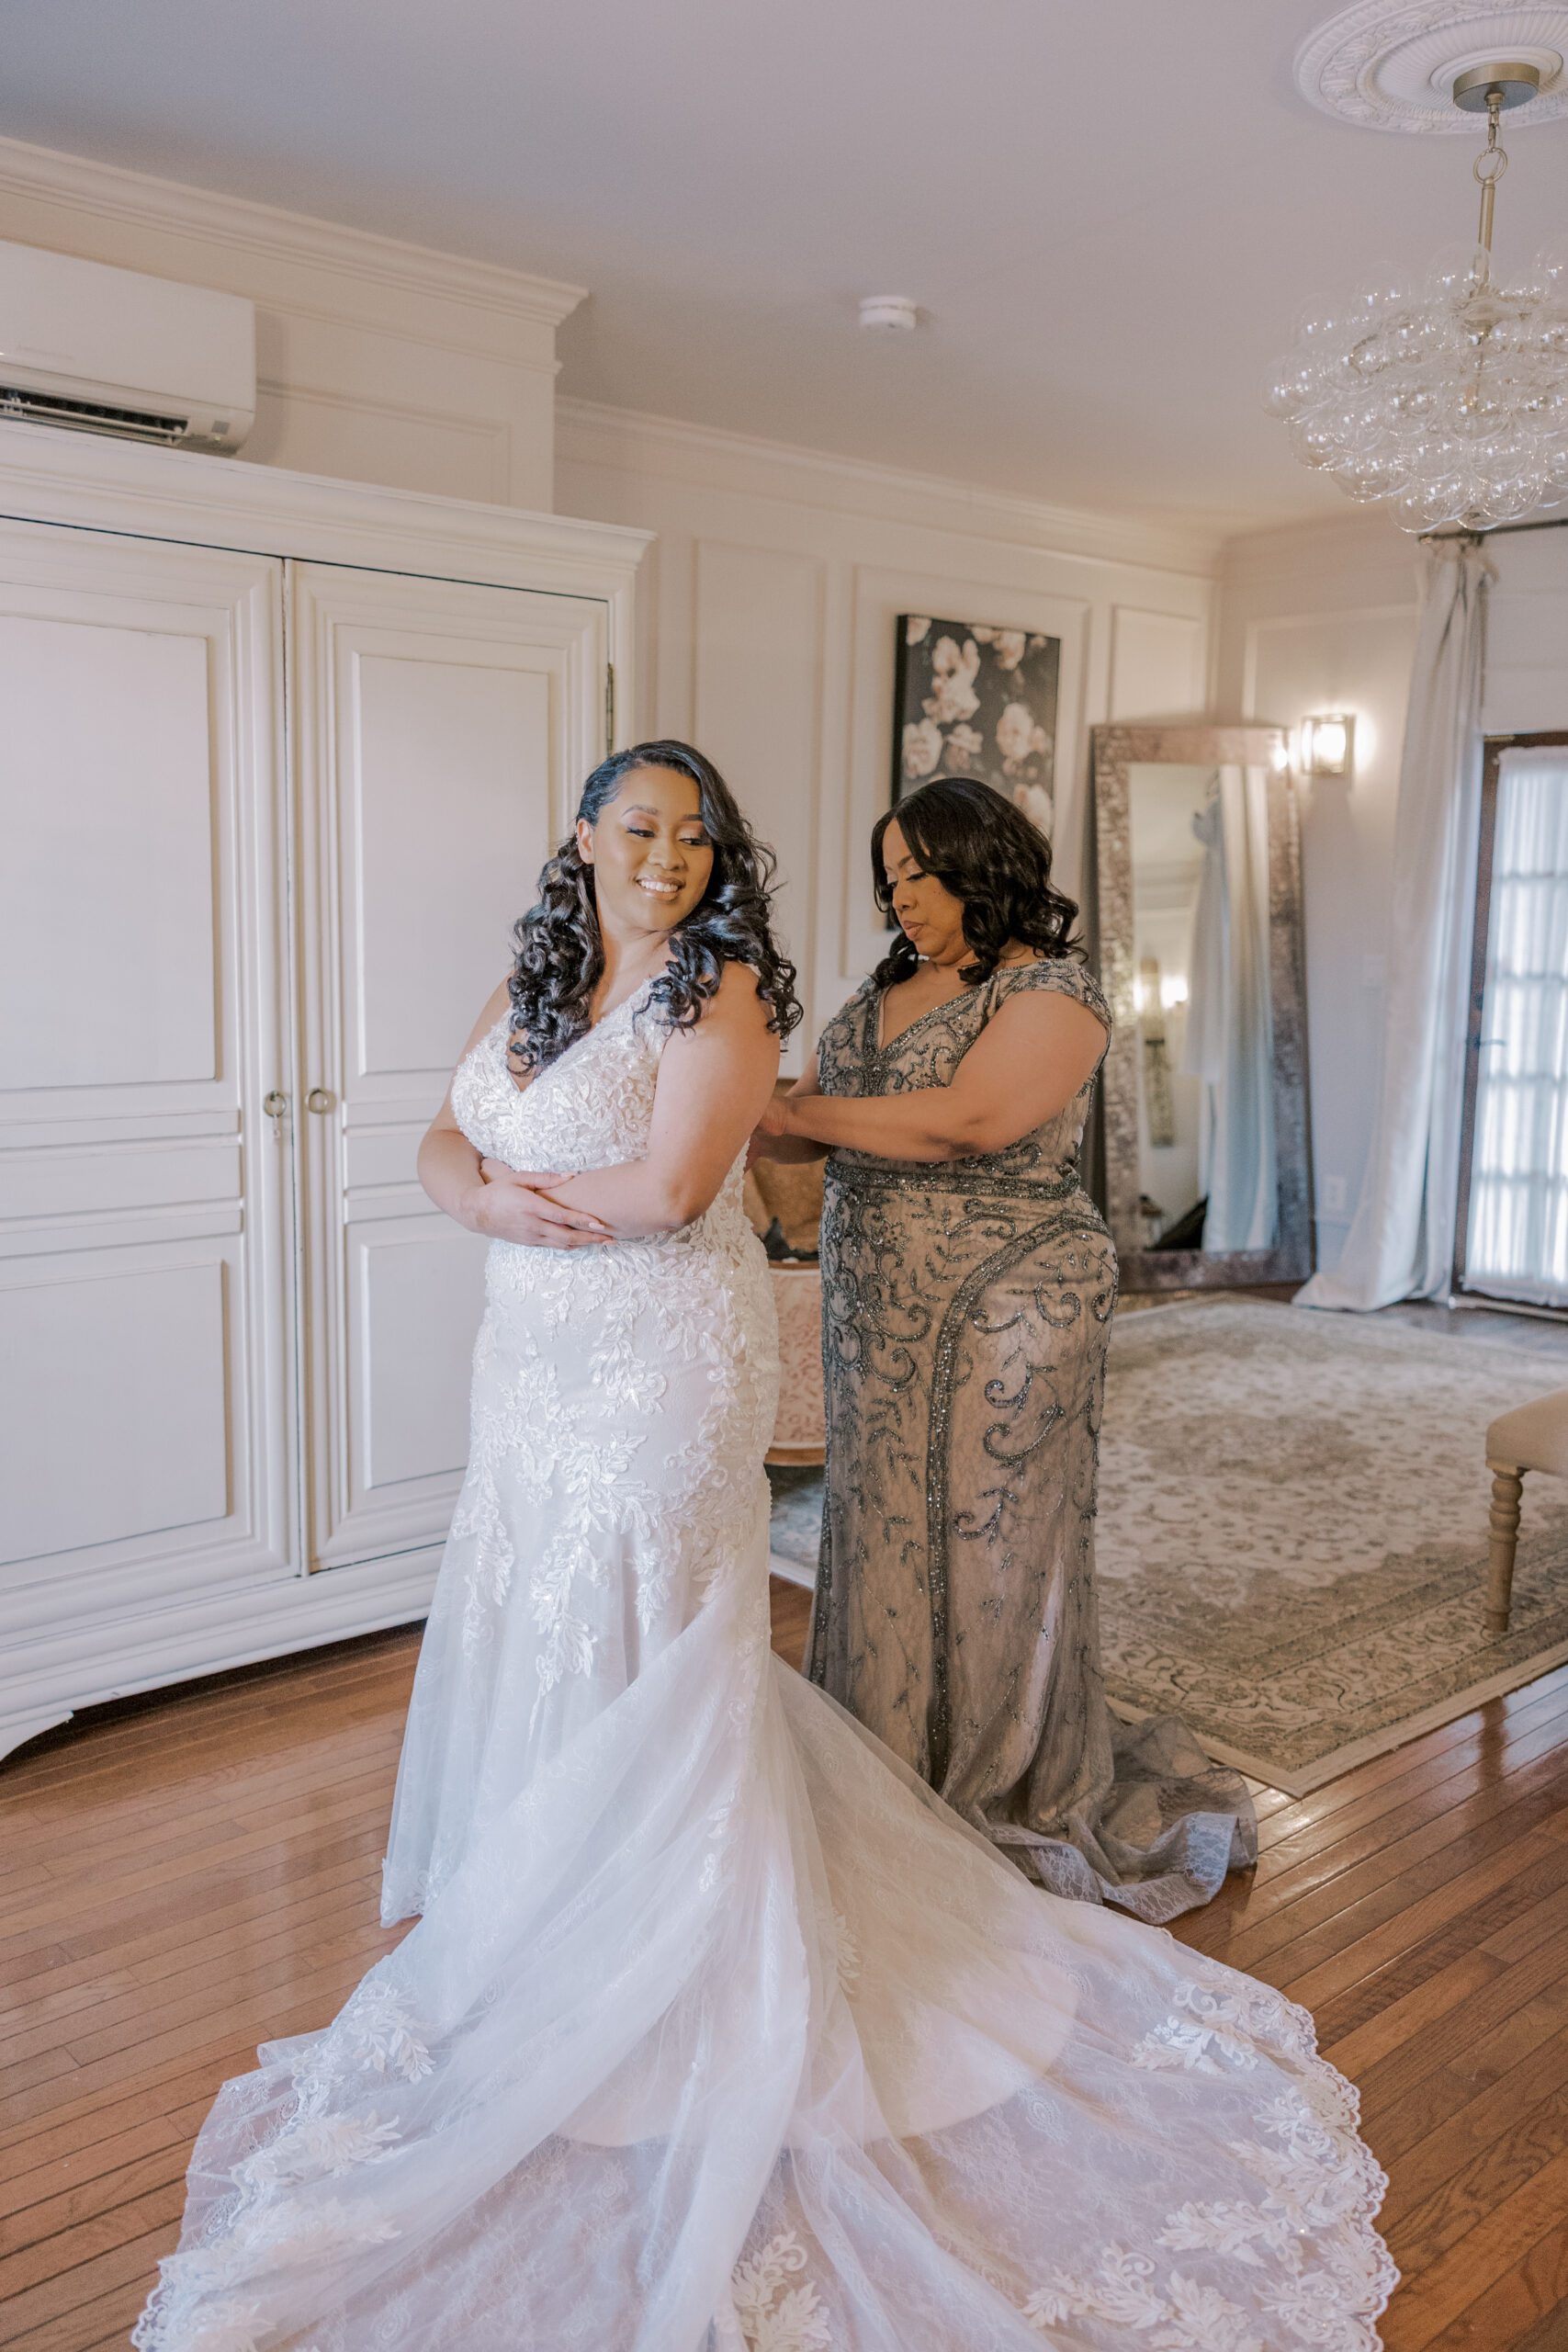 Full length photo of bride in her wedding dress while her mother adjusts the back of it